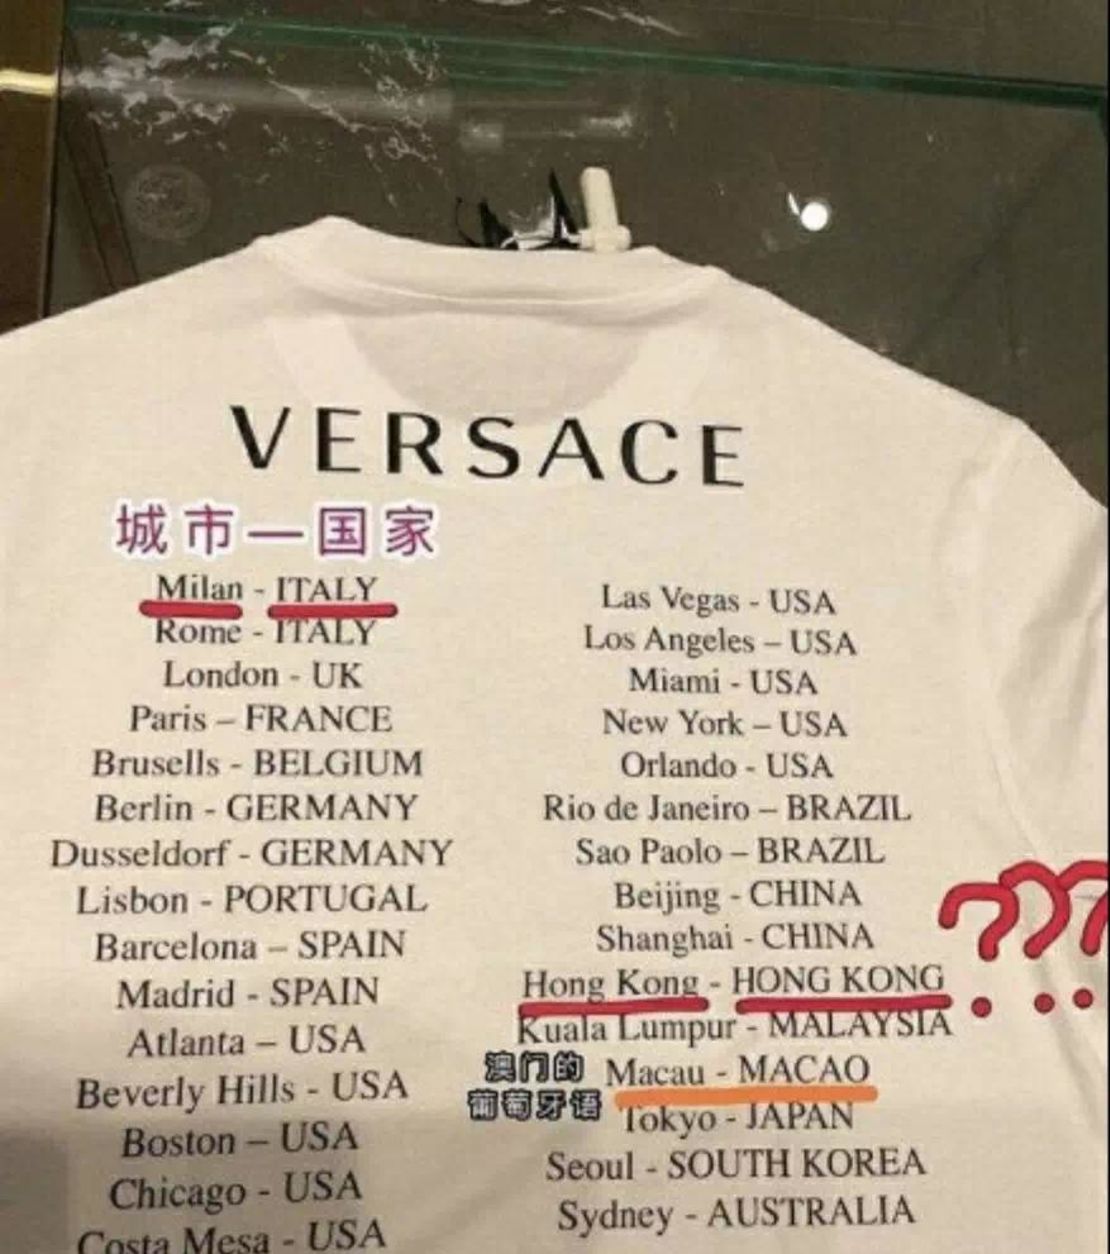 A photo of a Versace T-shirt which appears to suggest that Hong Kong is its own country.